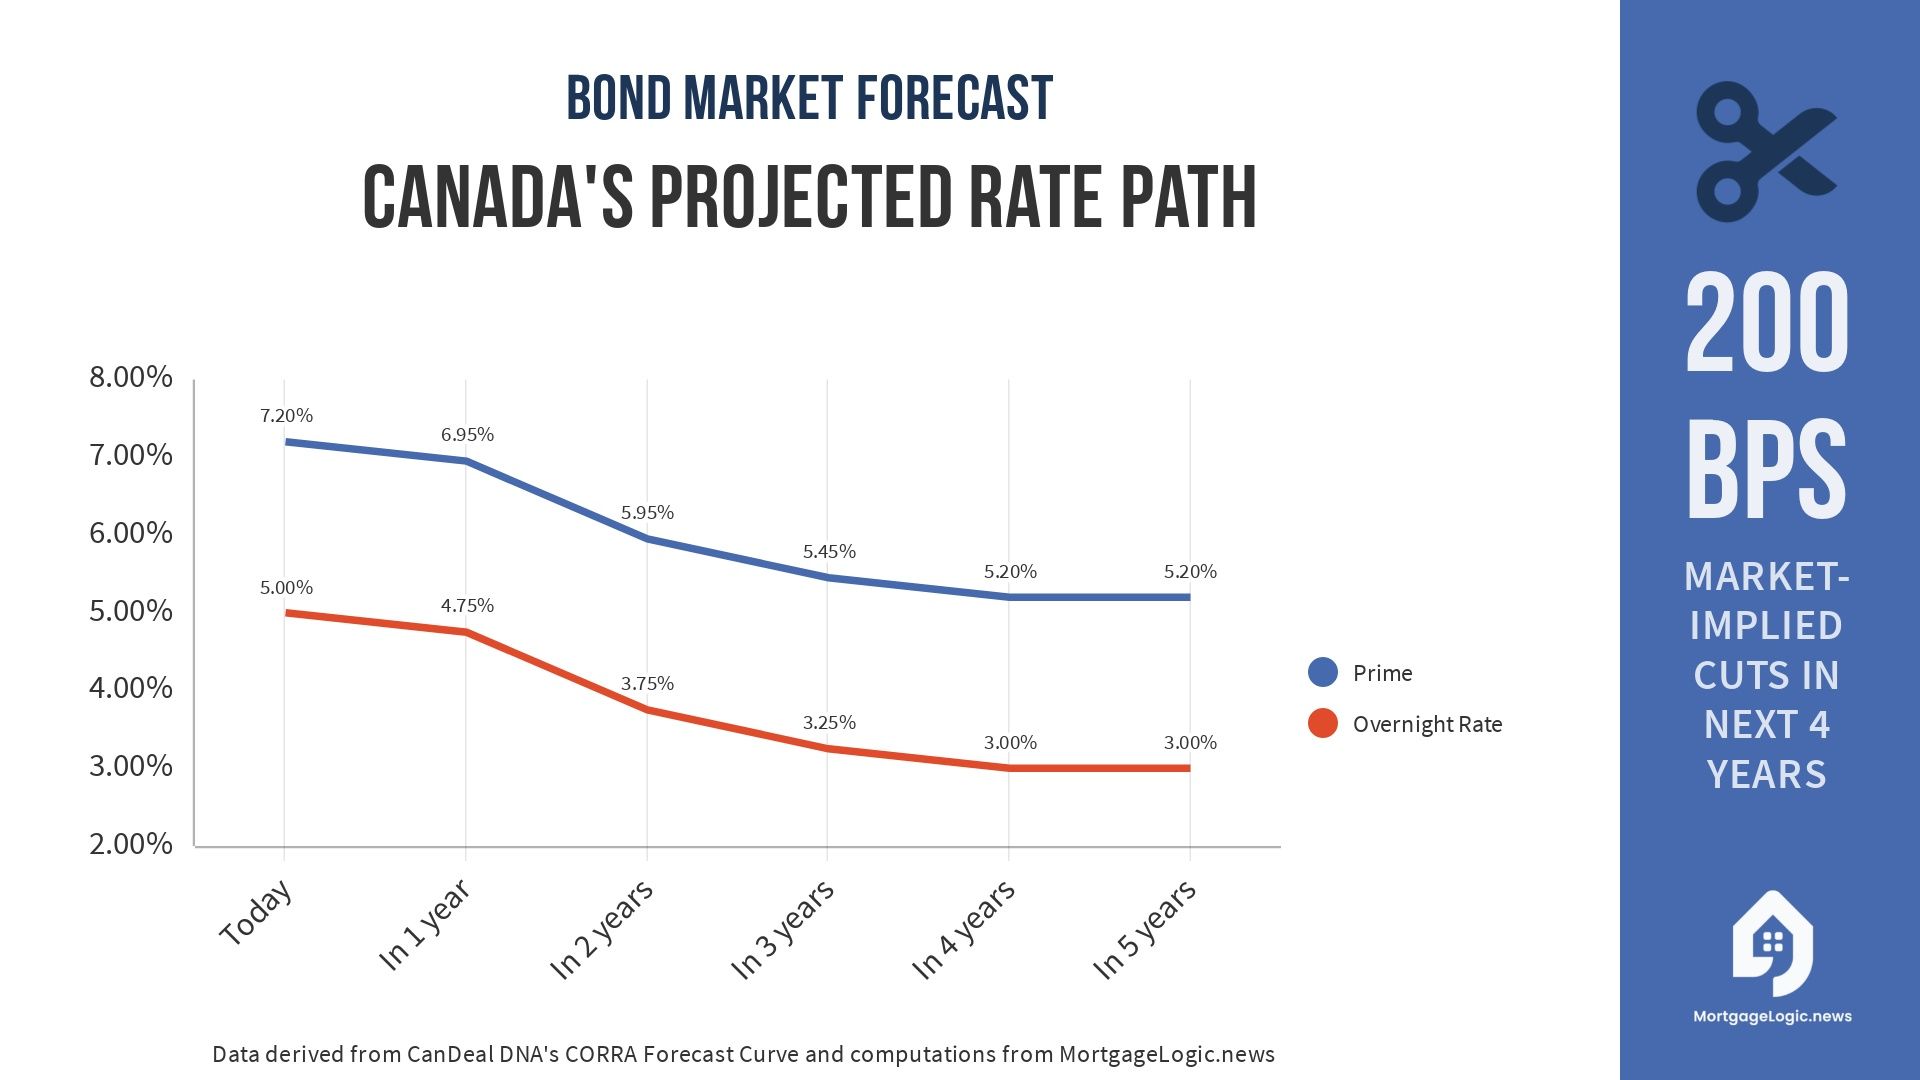 Bye-Bye CDOR, Hello CORRA: A Fresh Wind in the Sails of Canadian Mortgage Forecasting